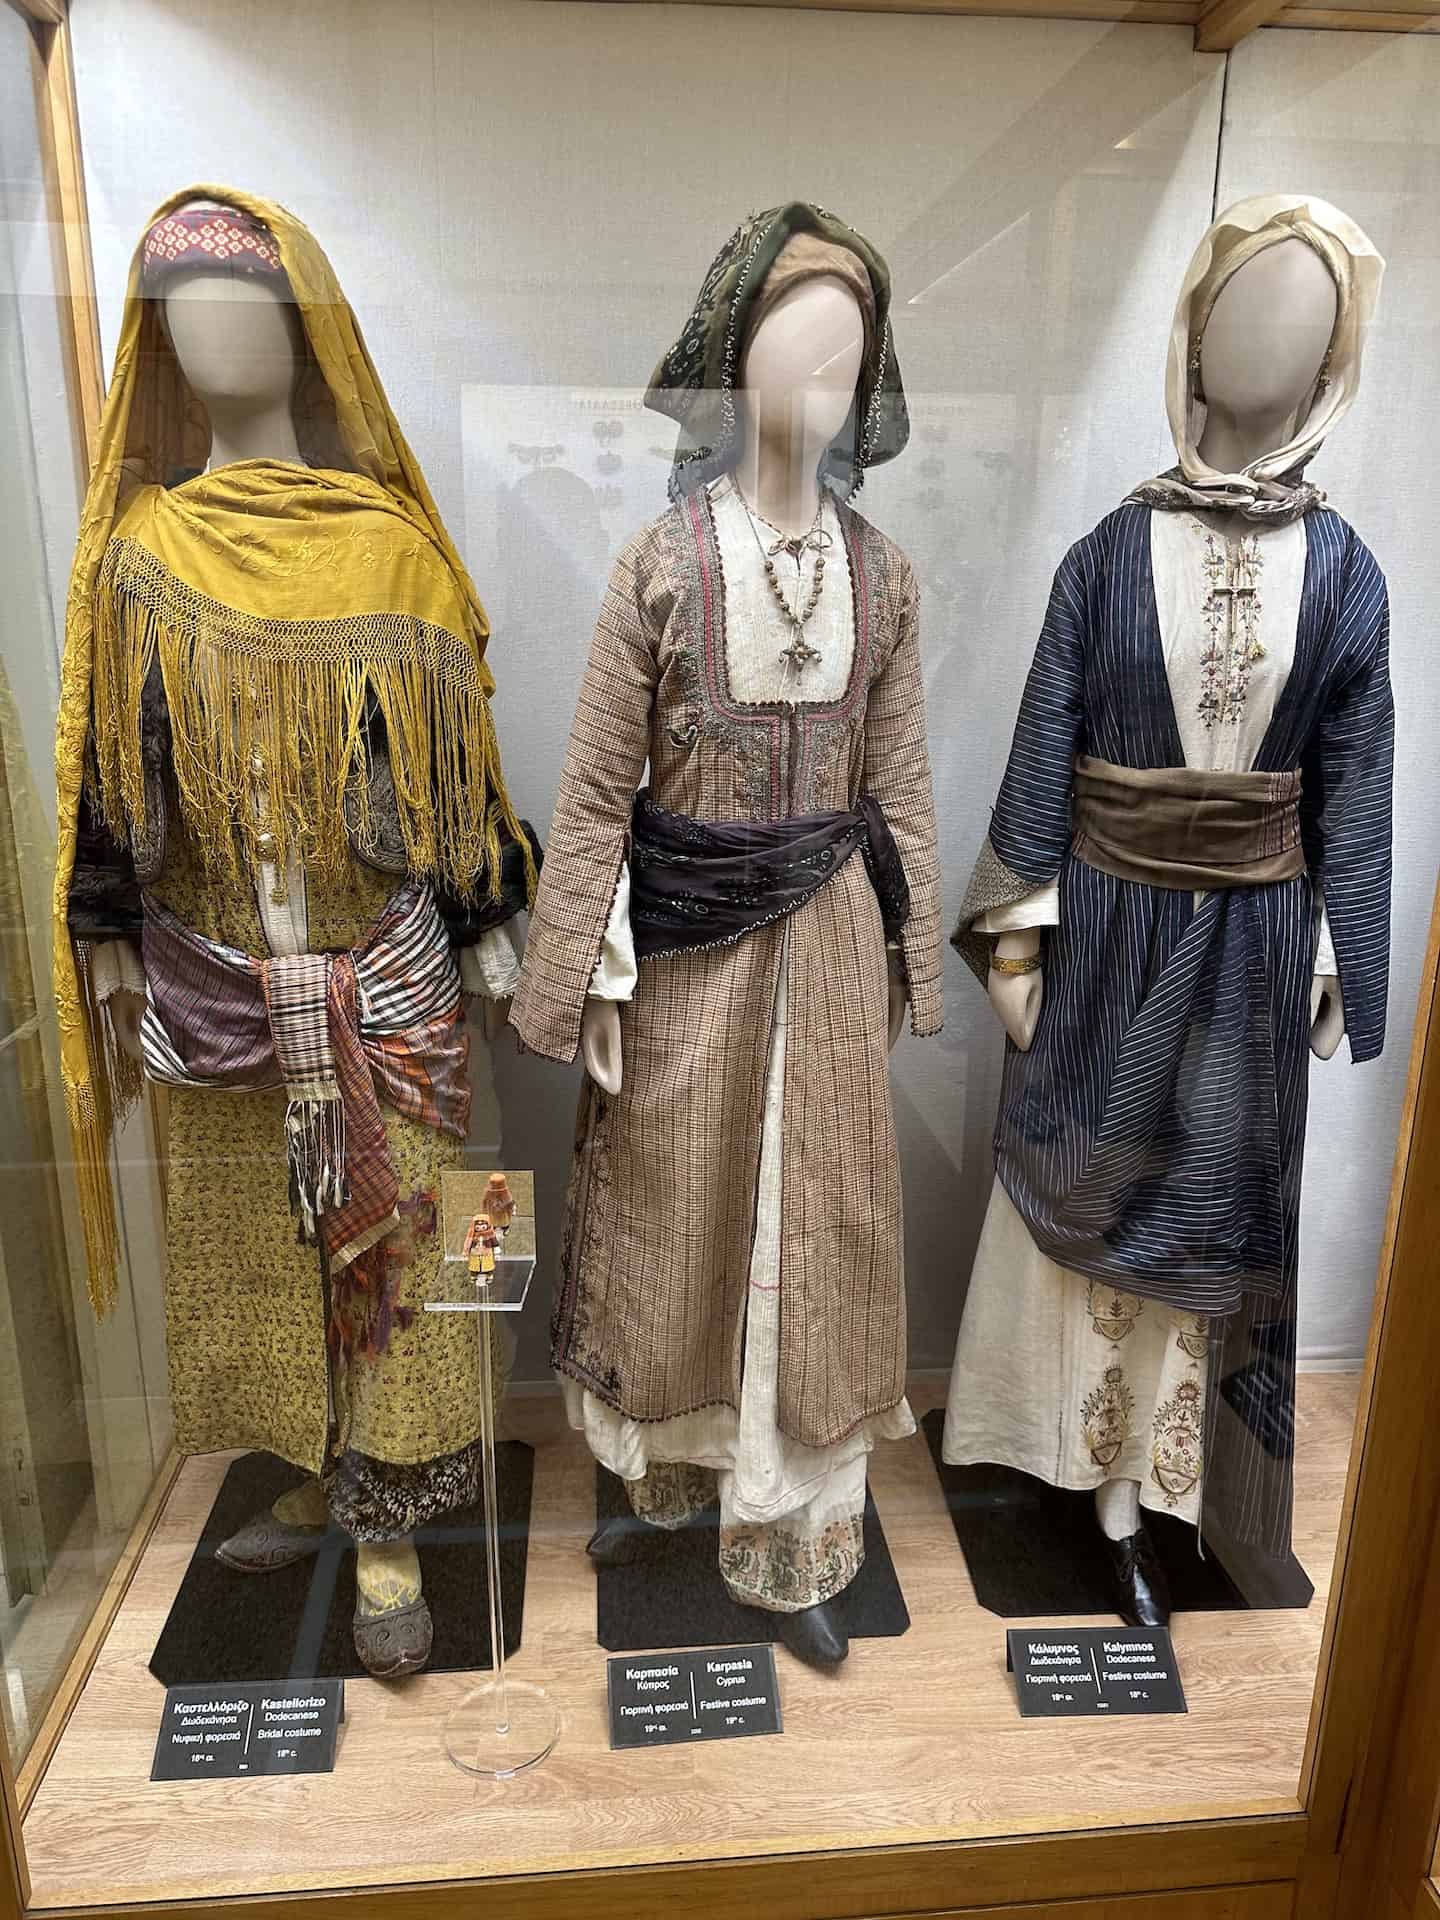 Bridal costume from Kastellorizo, 18th century (left); festive costume from Karpasia, Cyprus, 19th century (center); and festive costume from Kalymnos, 18th century (right) at the National Historical Museum in Athens, Greece